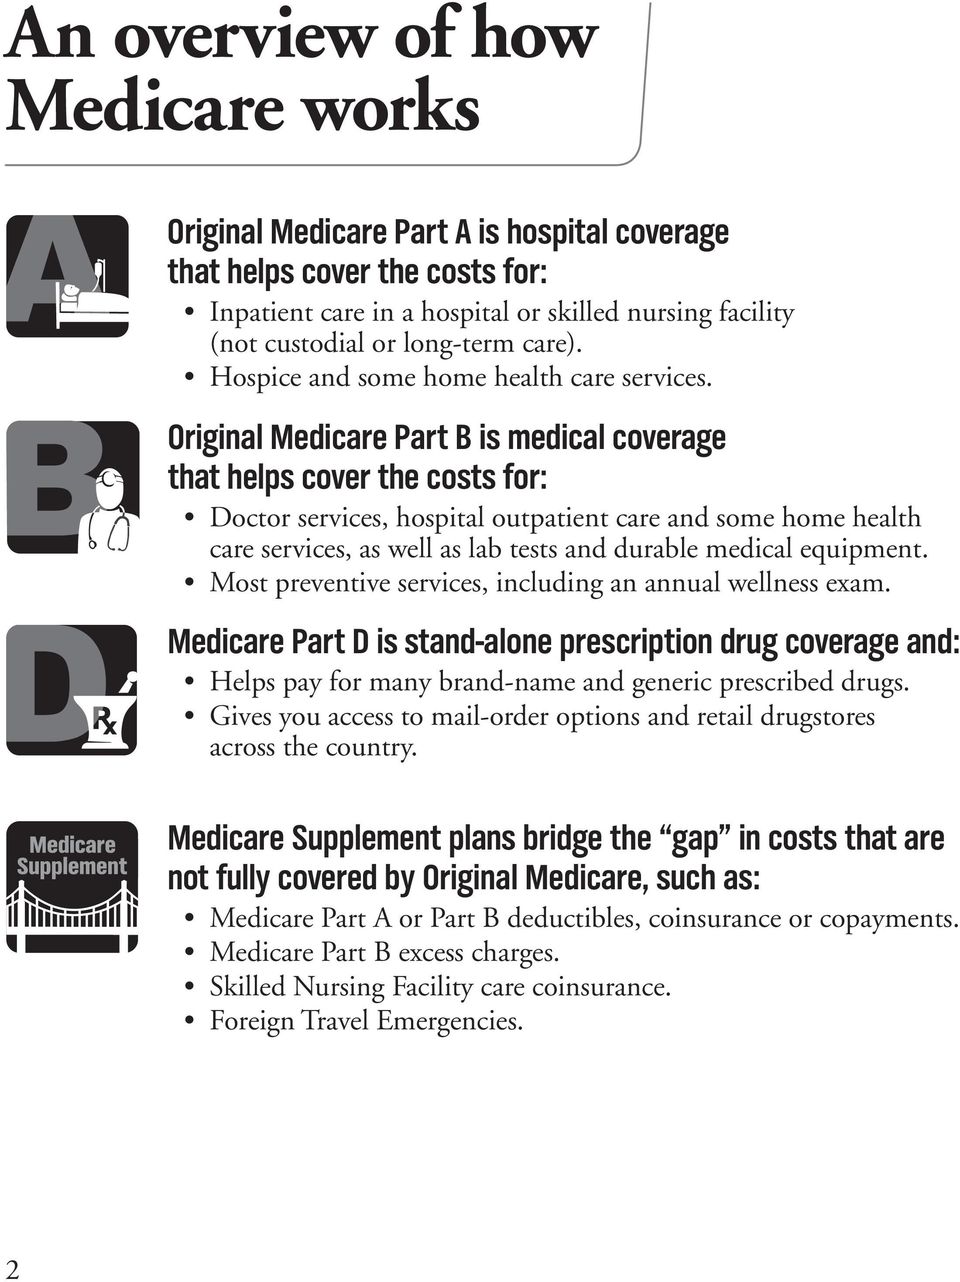 Original Medicare Part B is medical coverage that helps cover the costs for: Doctor services, hospital outpatient care and some home health care services, as well as lab tests and durable medical